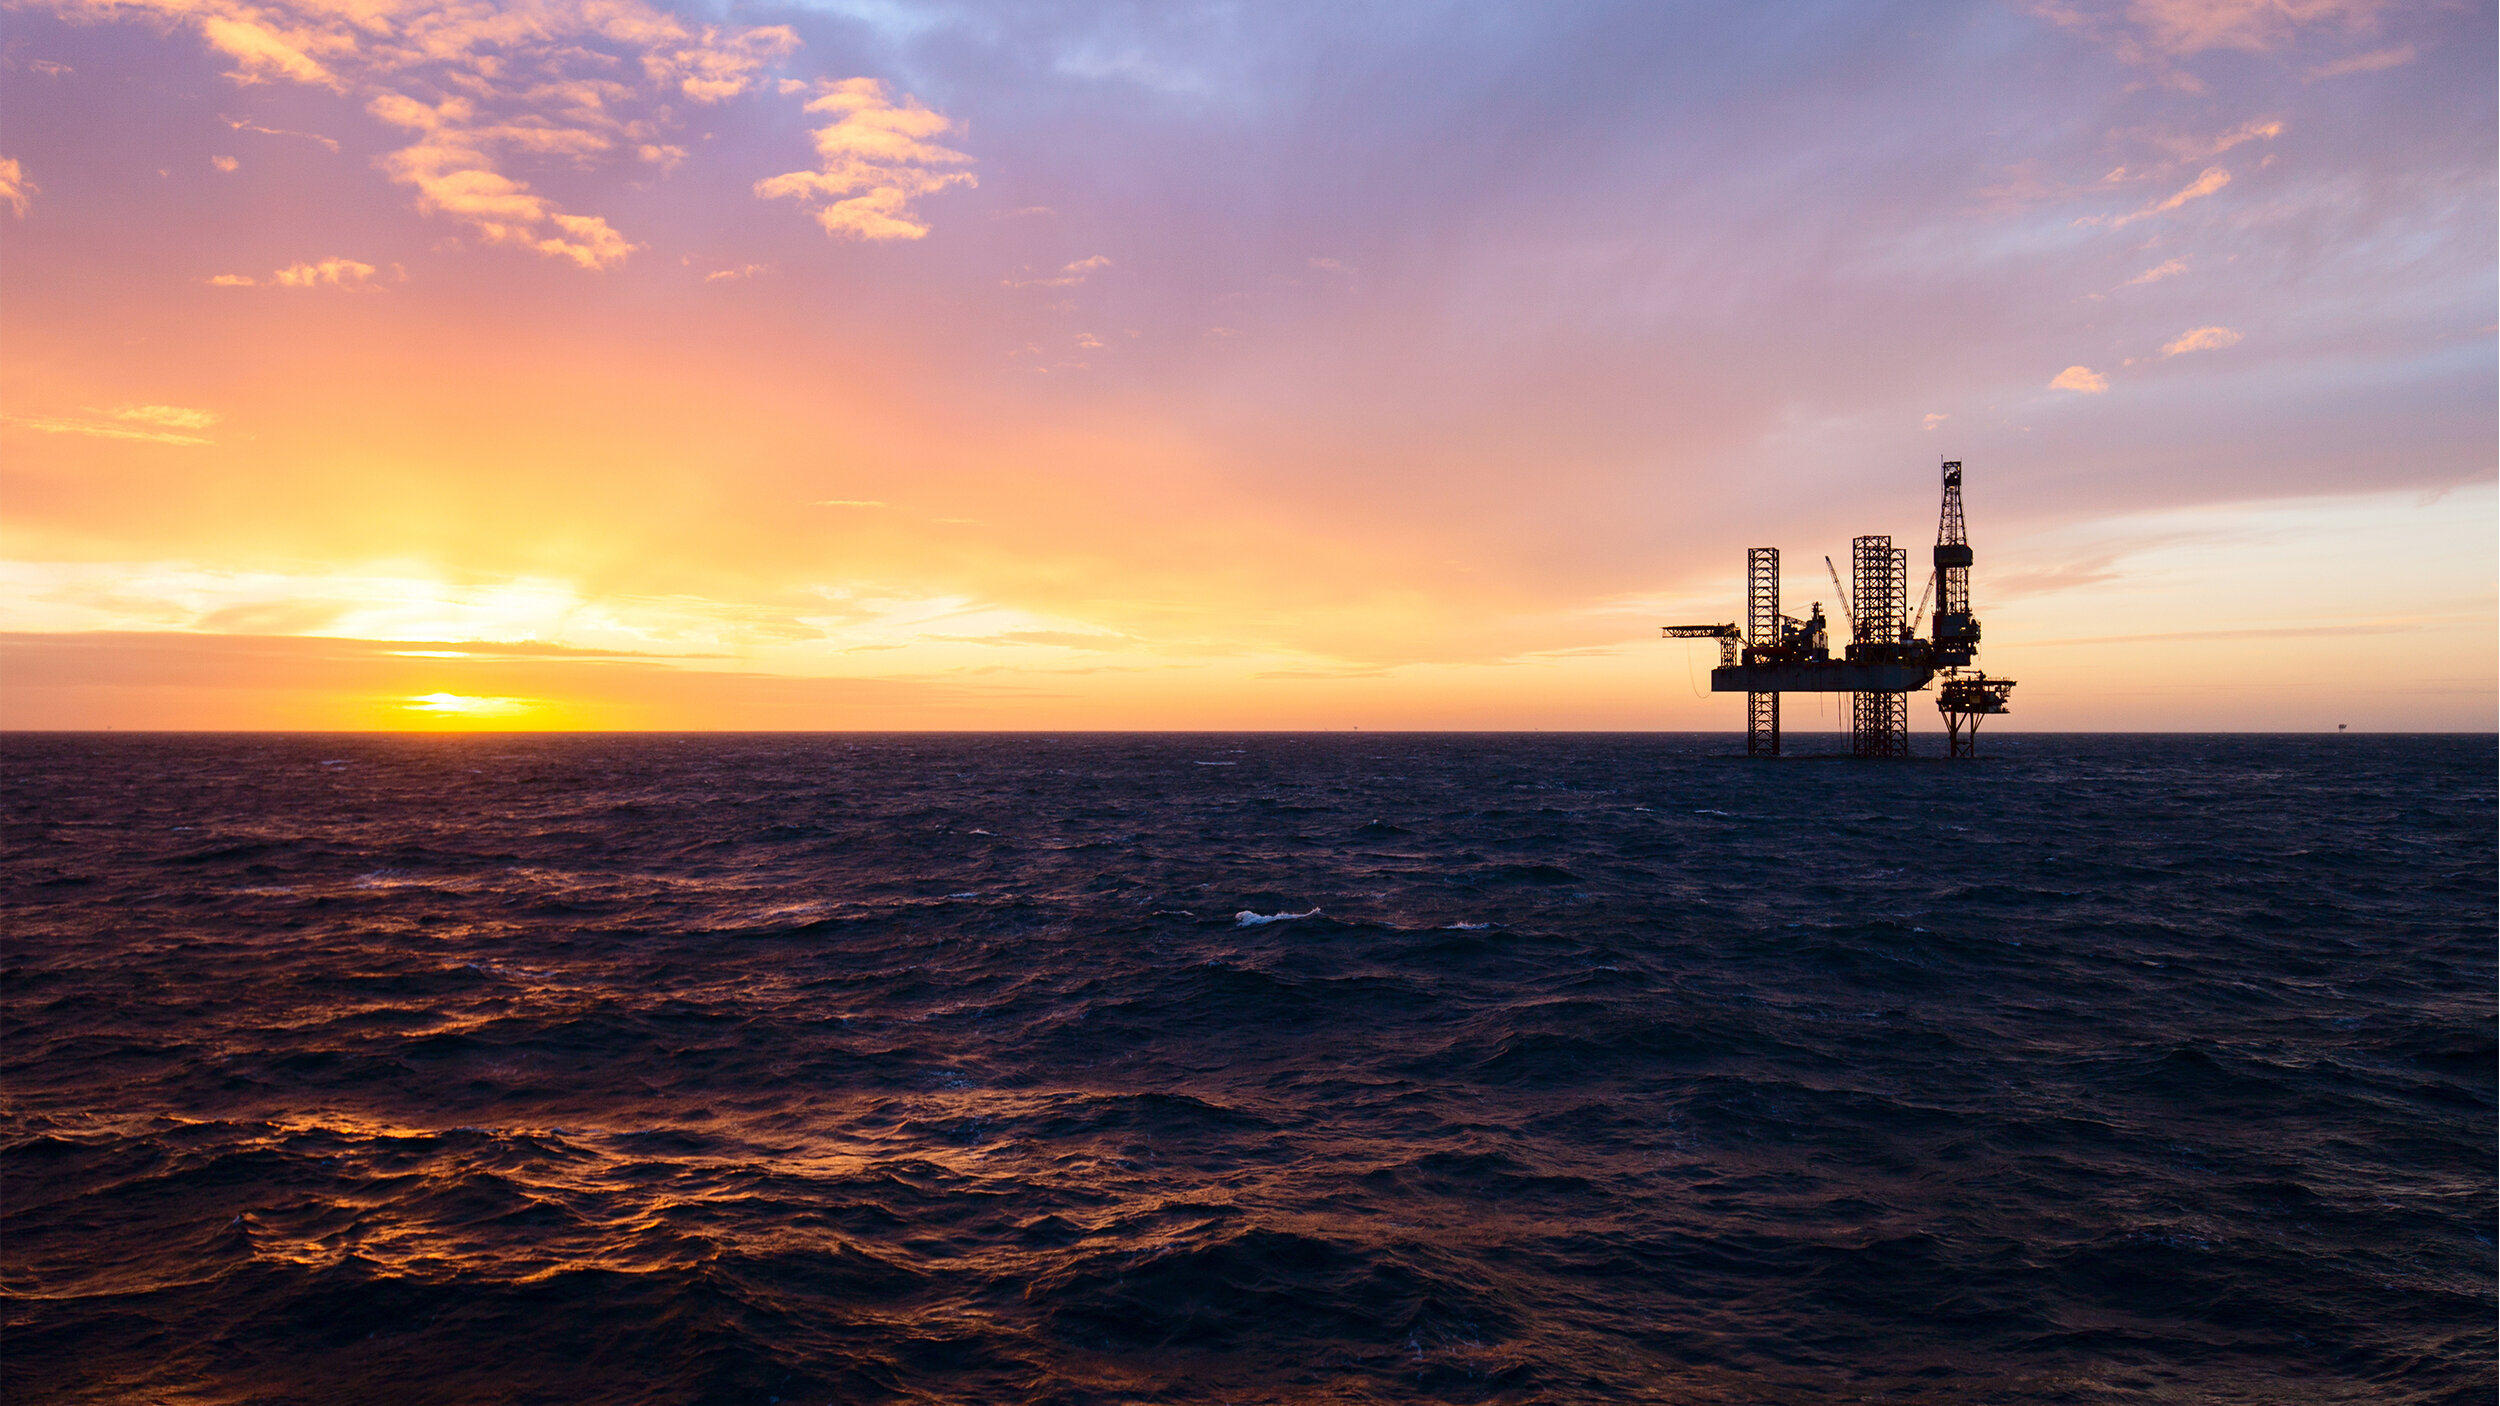 Efficient Integration Reduces Days Per Well in a Offshore Environment